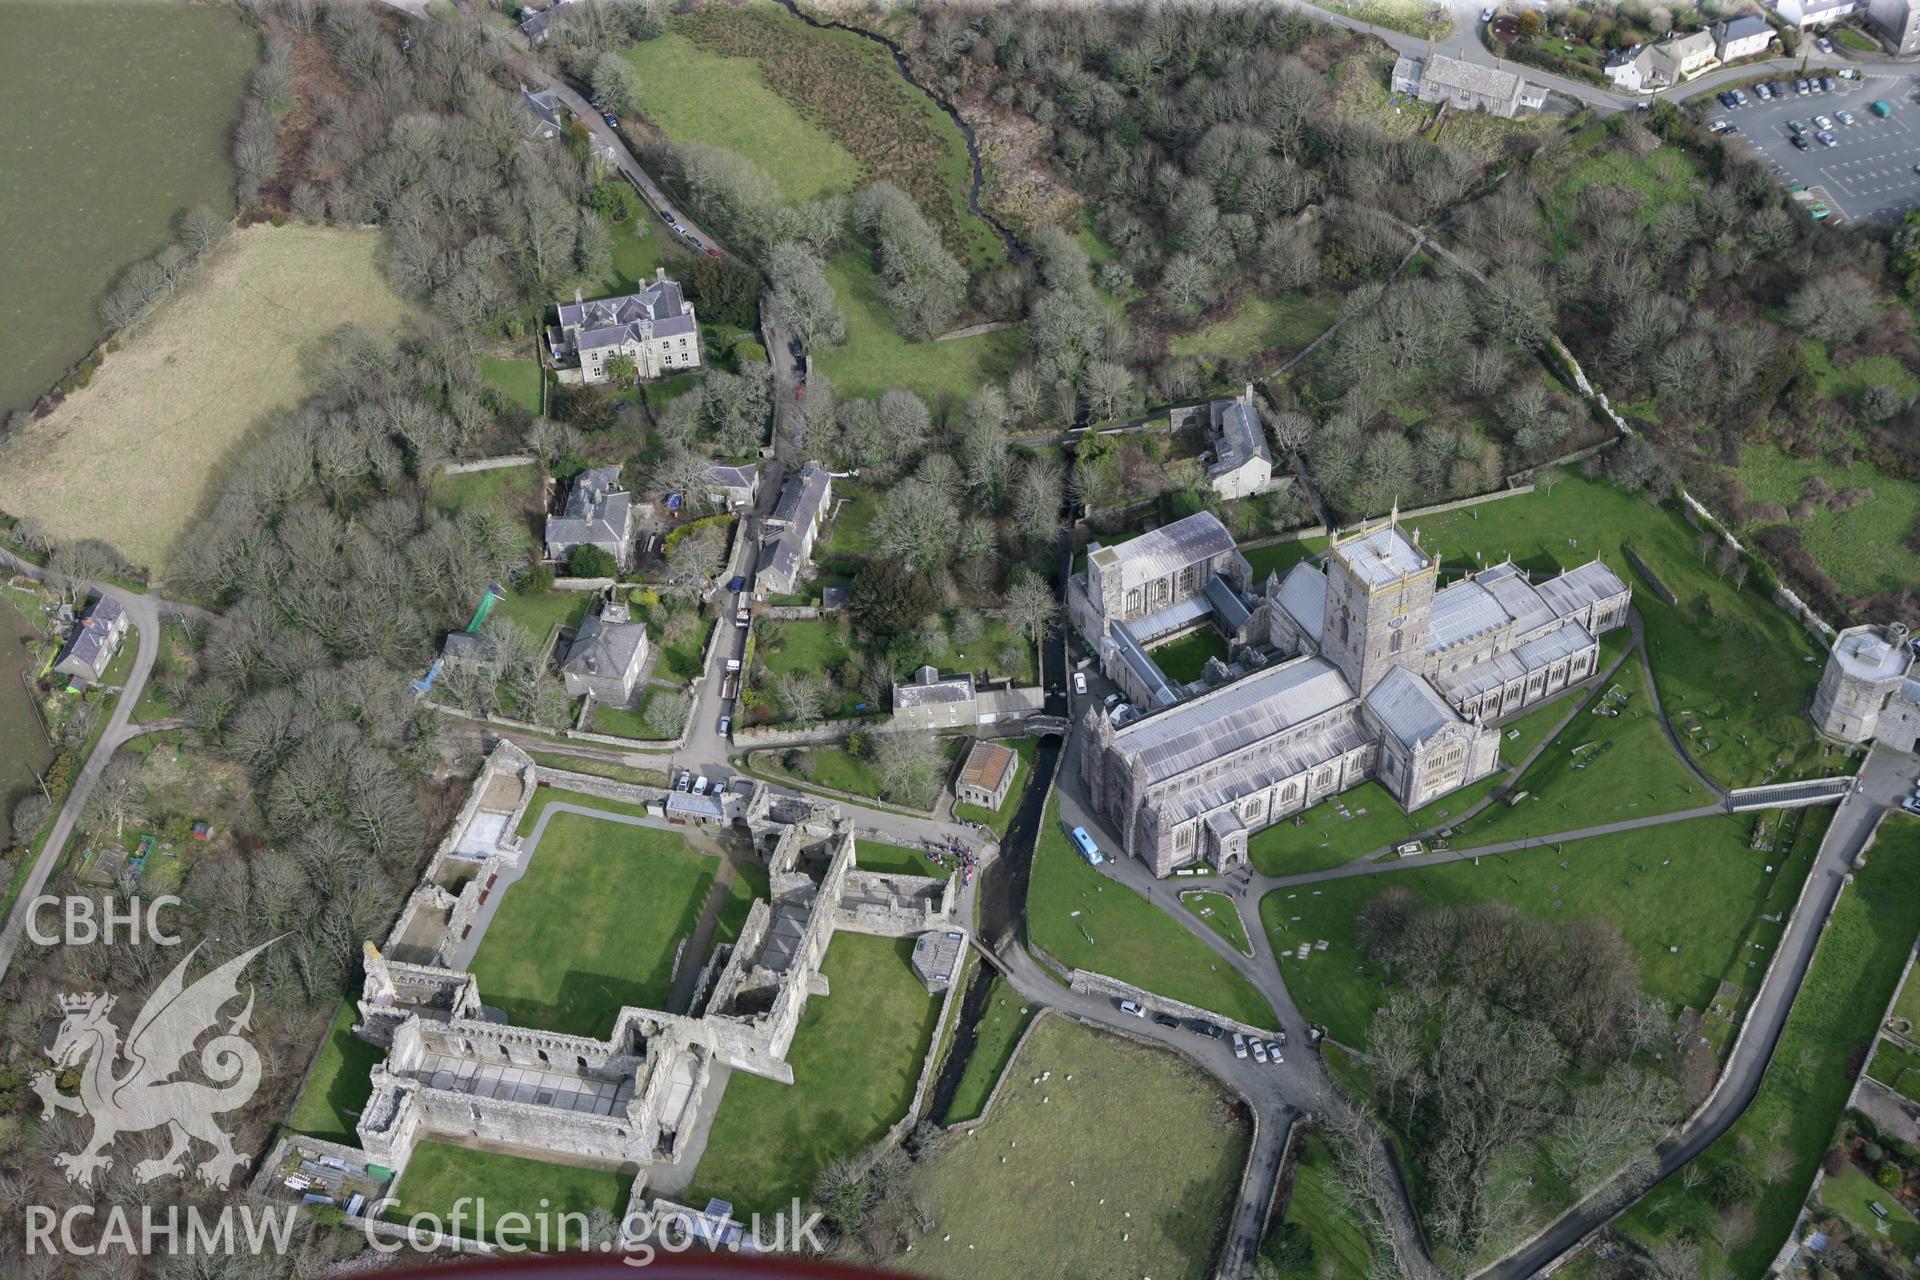 RCAHMW colour oblique aerial photograph of St David's Cathedral. Taken on 02 March 2010 by Toby Driver